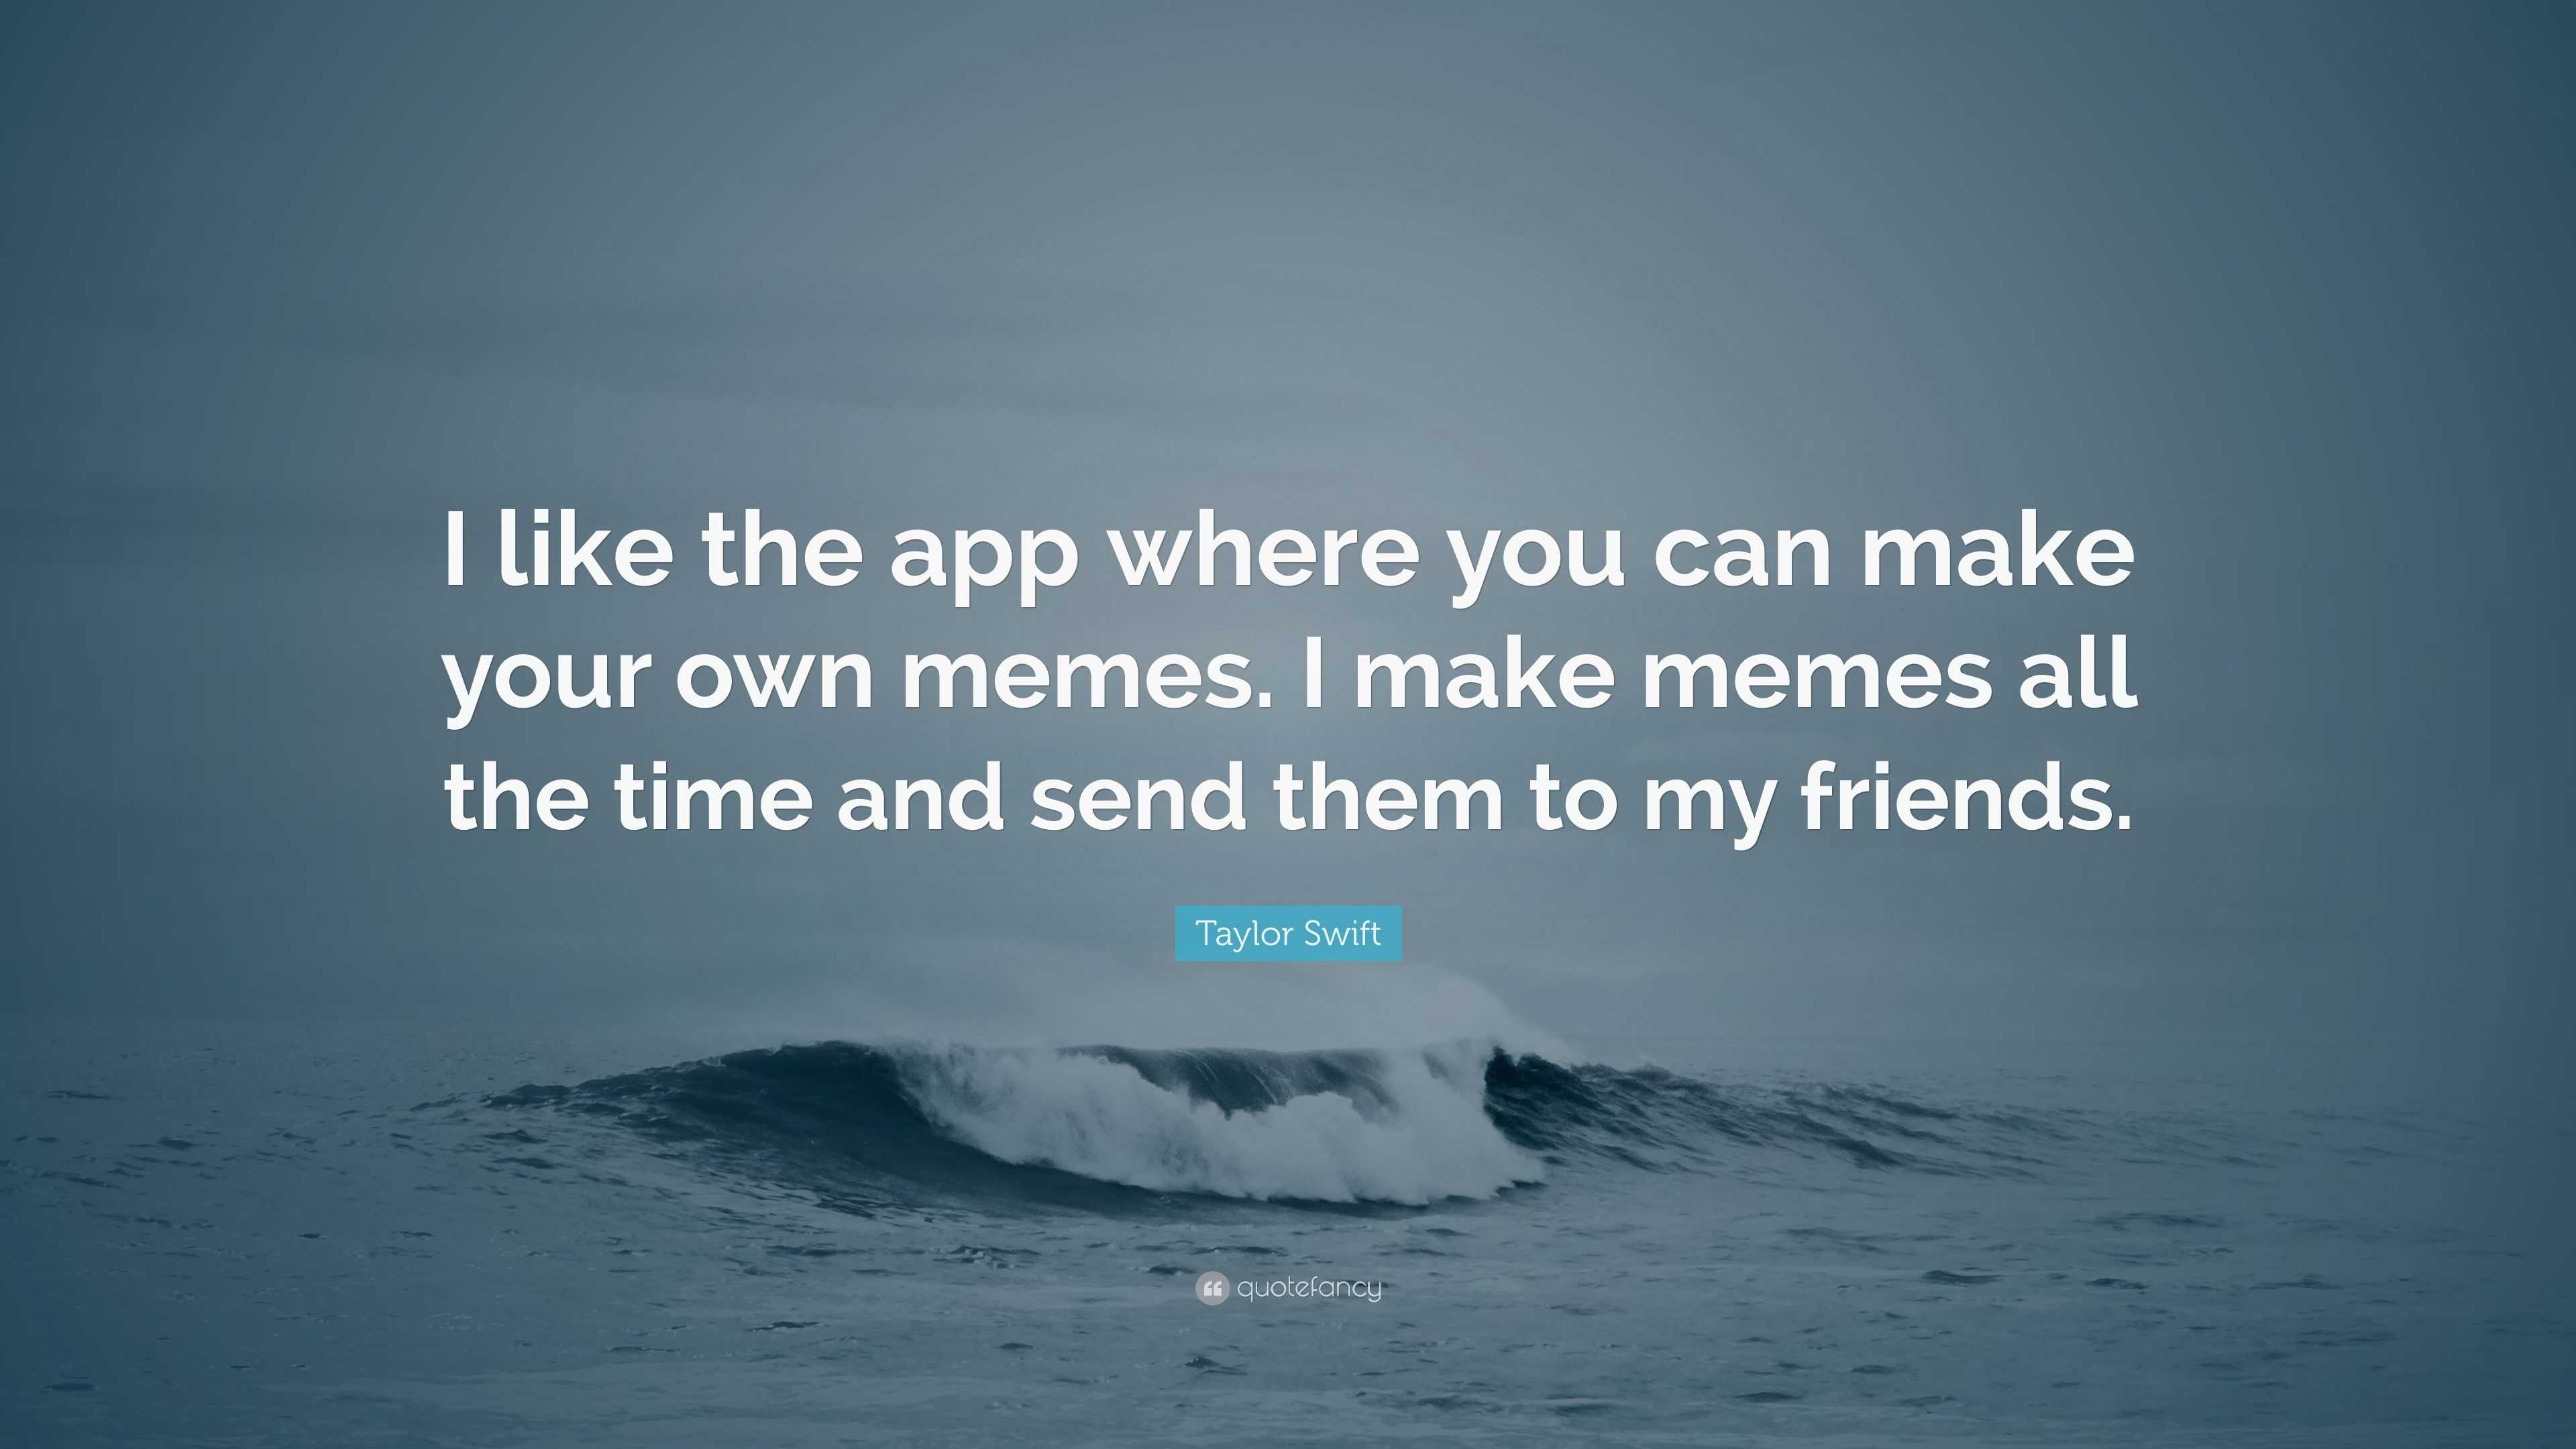 Taylor Swift Quote: “I like the app where you can make your own memes. I  make